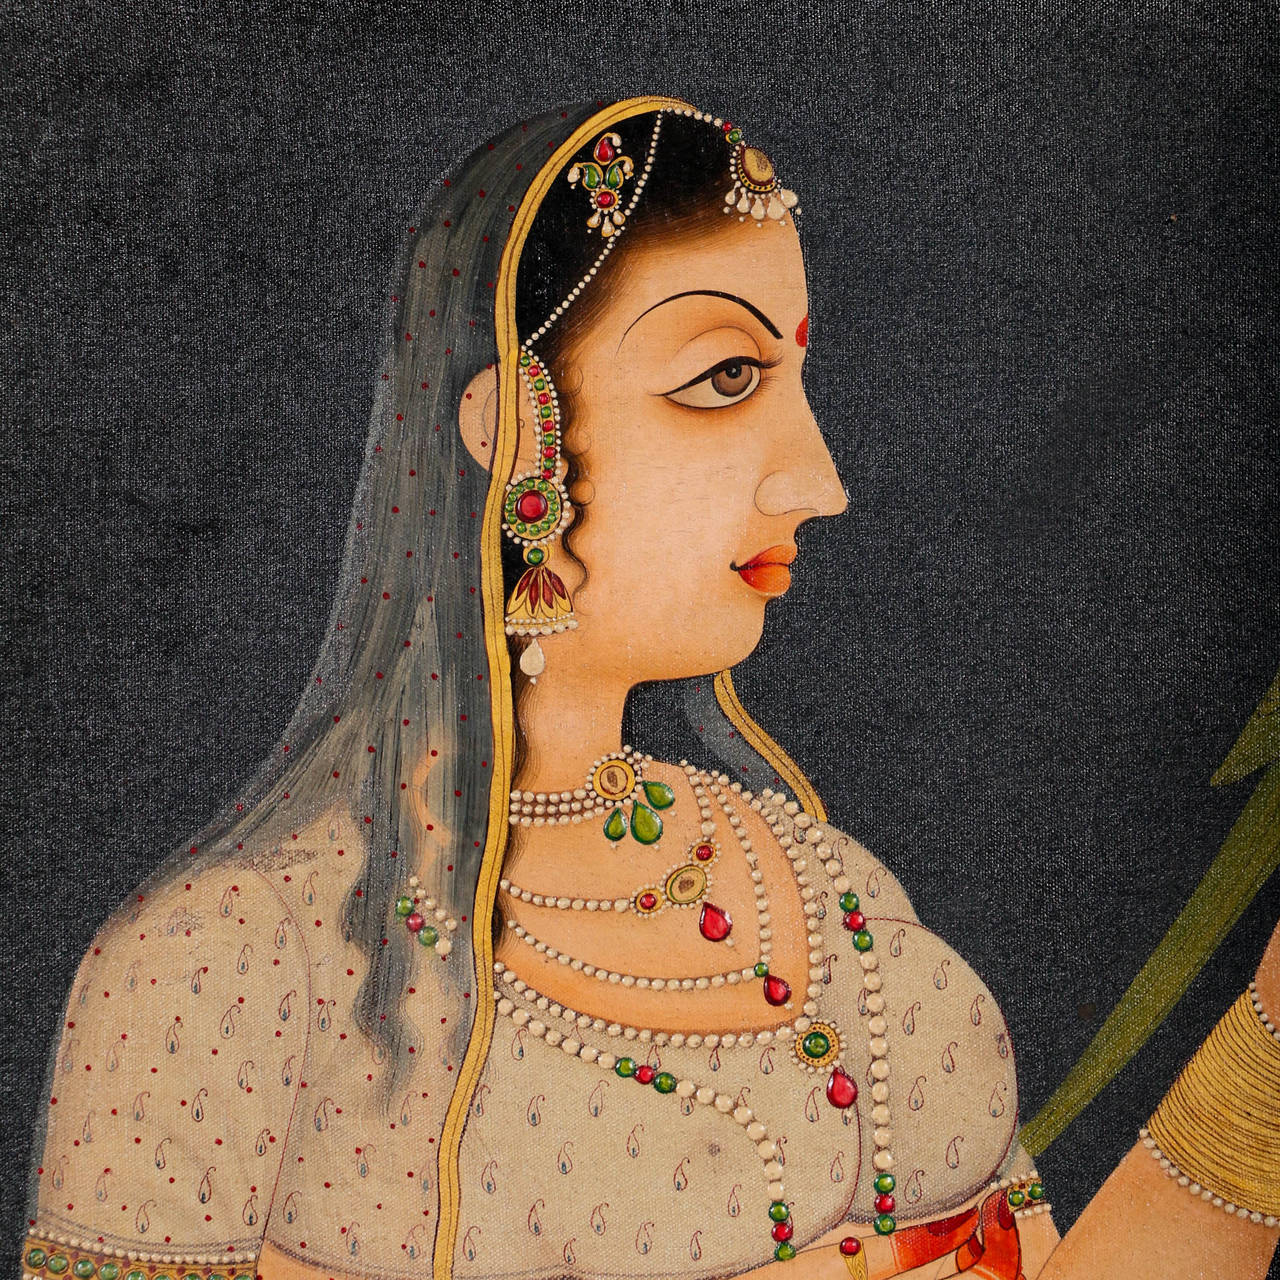 Unknown artist, large oil on canvas. Indian stylized portrait of woman wearing green dress with bird on her hand.